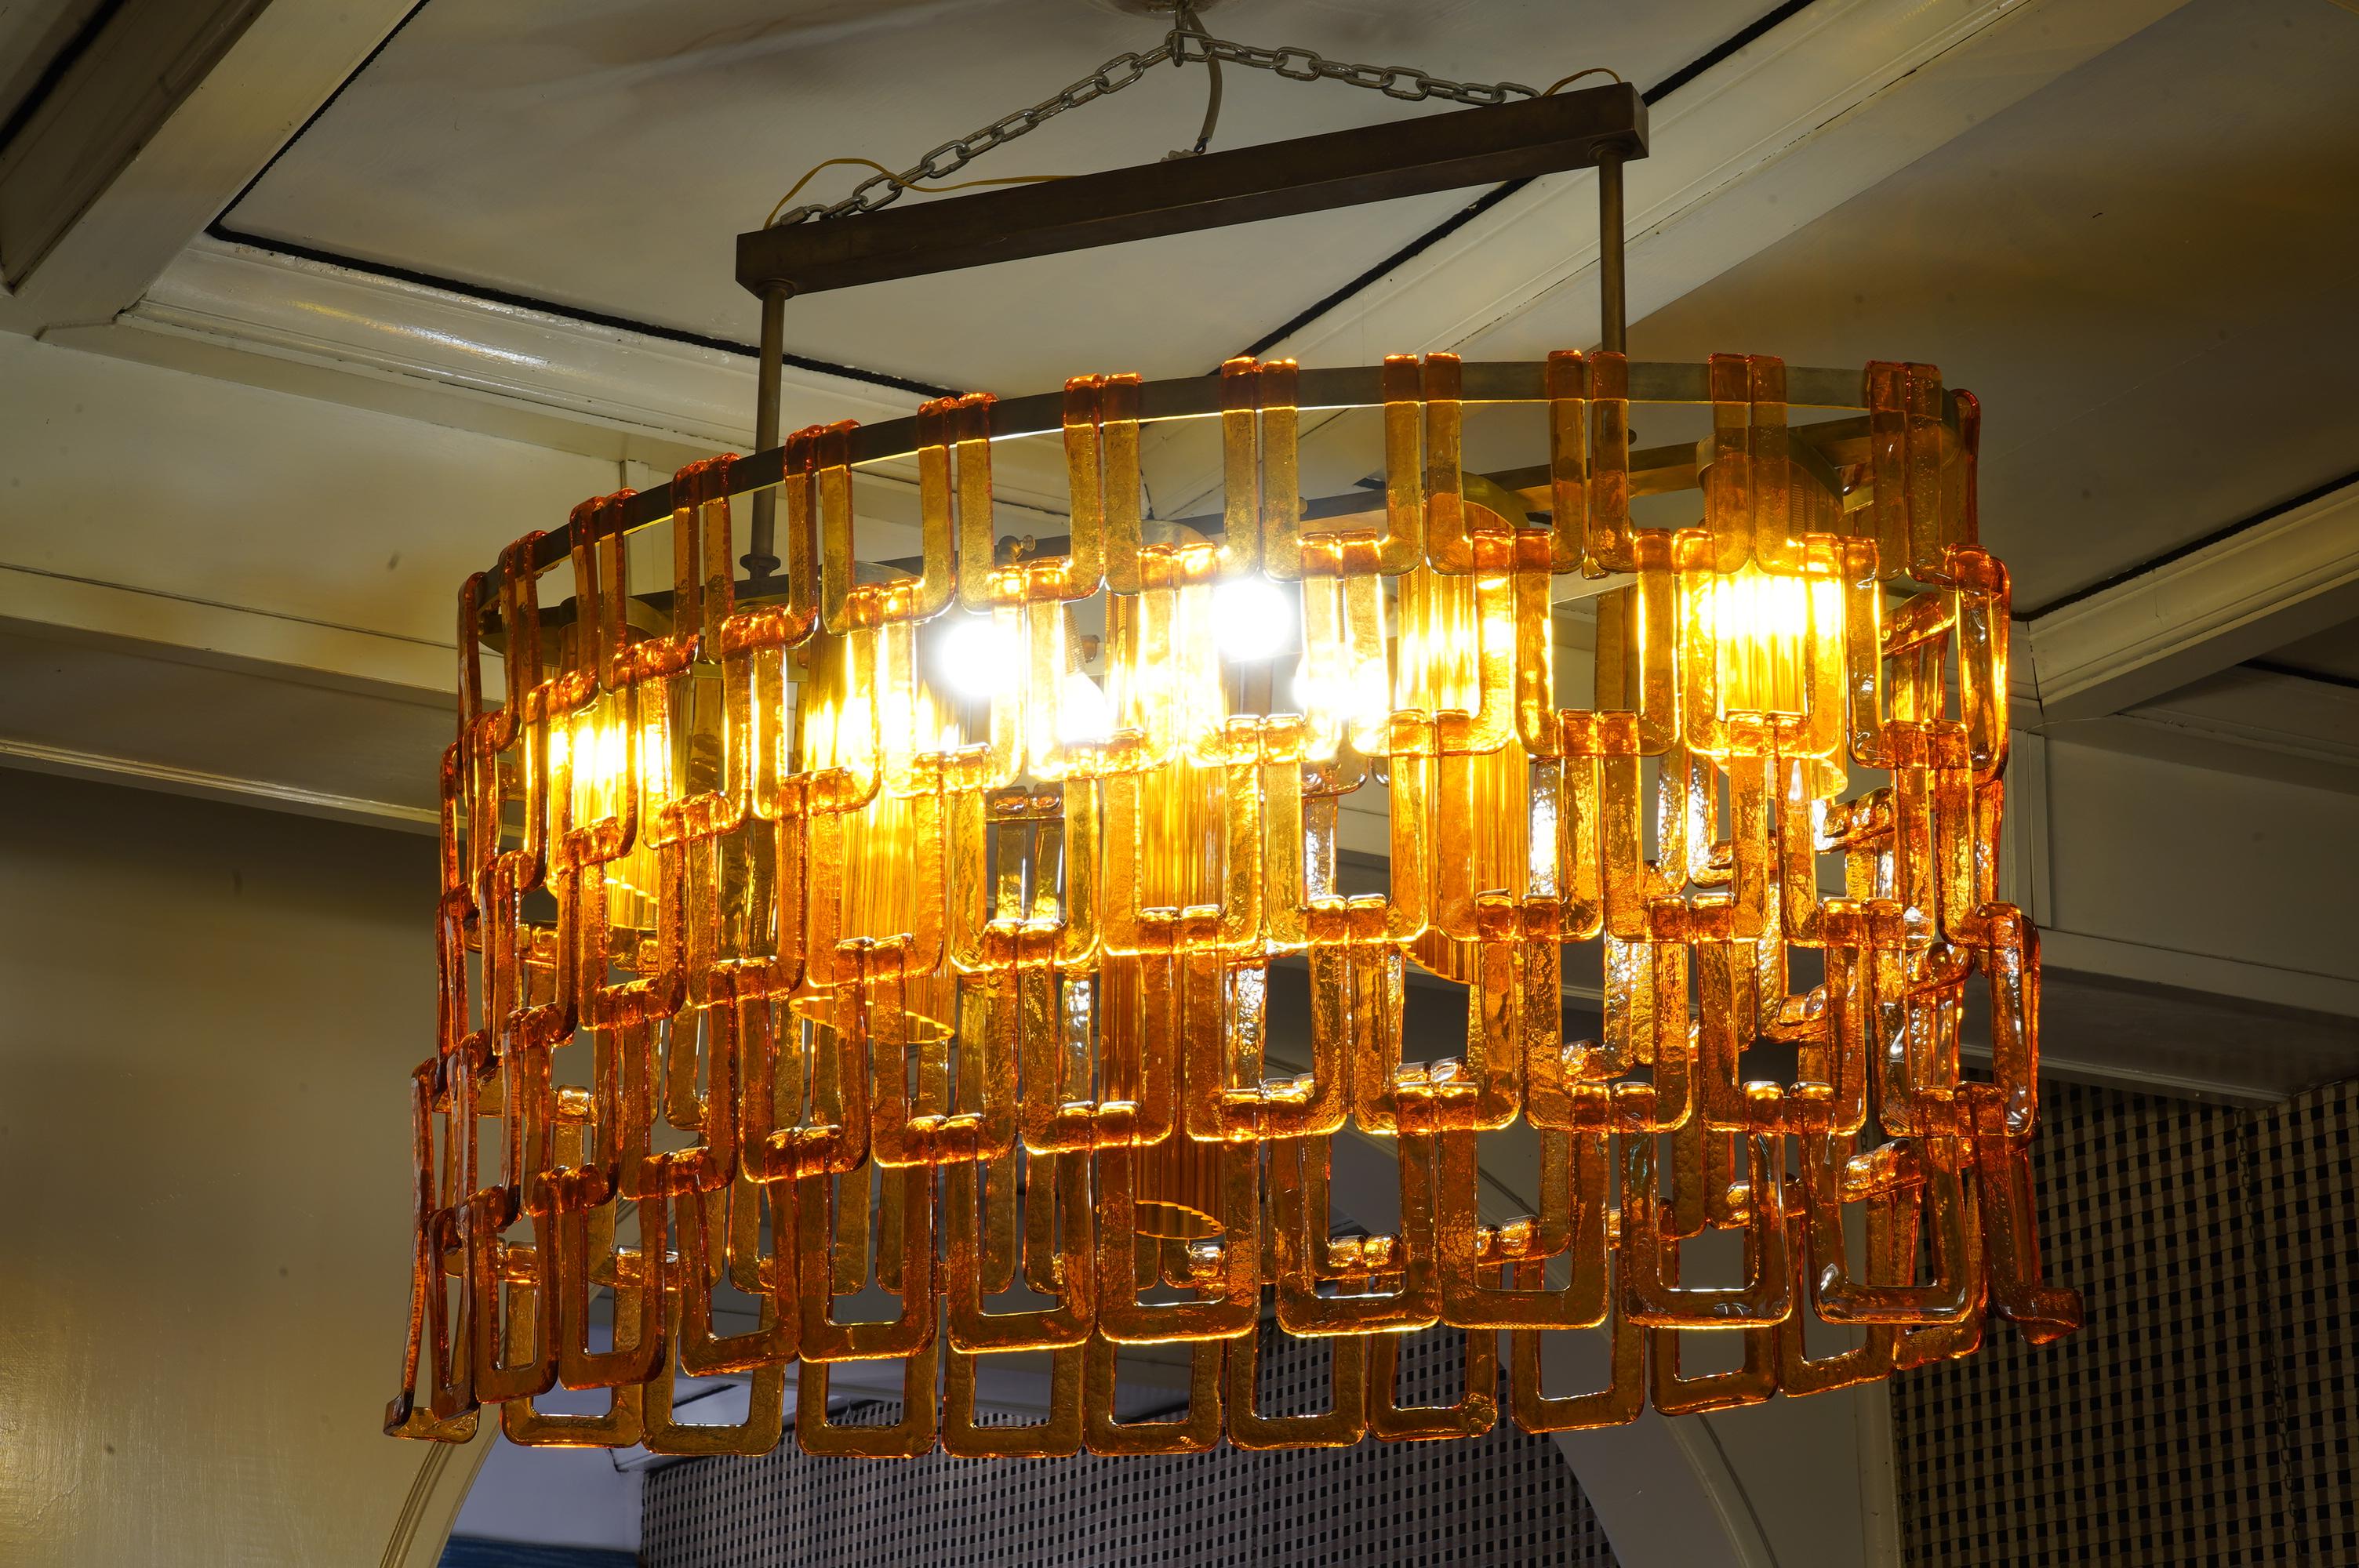 Simple and precious chandelier in Murano orange glass, from the furnace of Vistosi. Its oval design is very elegant.

The chandelier consists of a brass frame and its oval design. All around have been hung some 